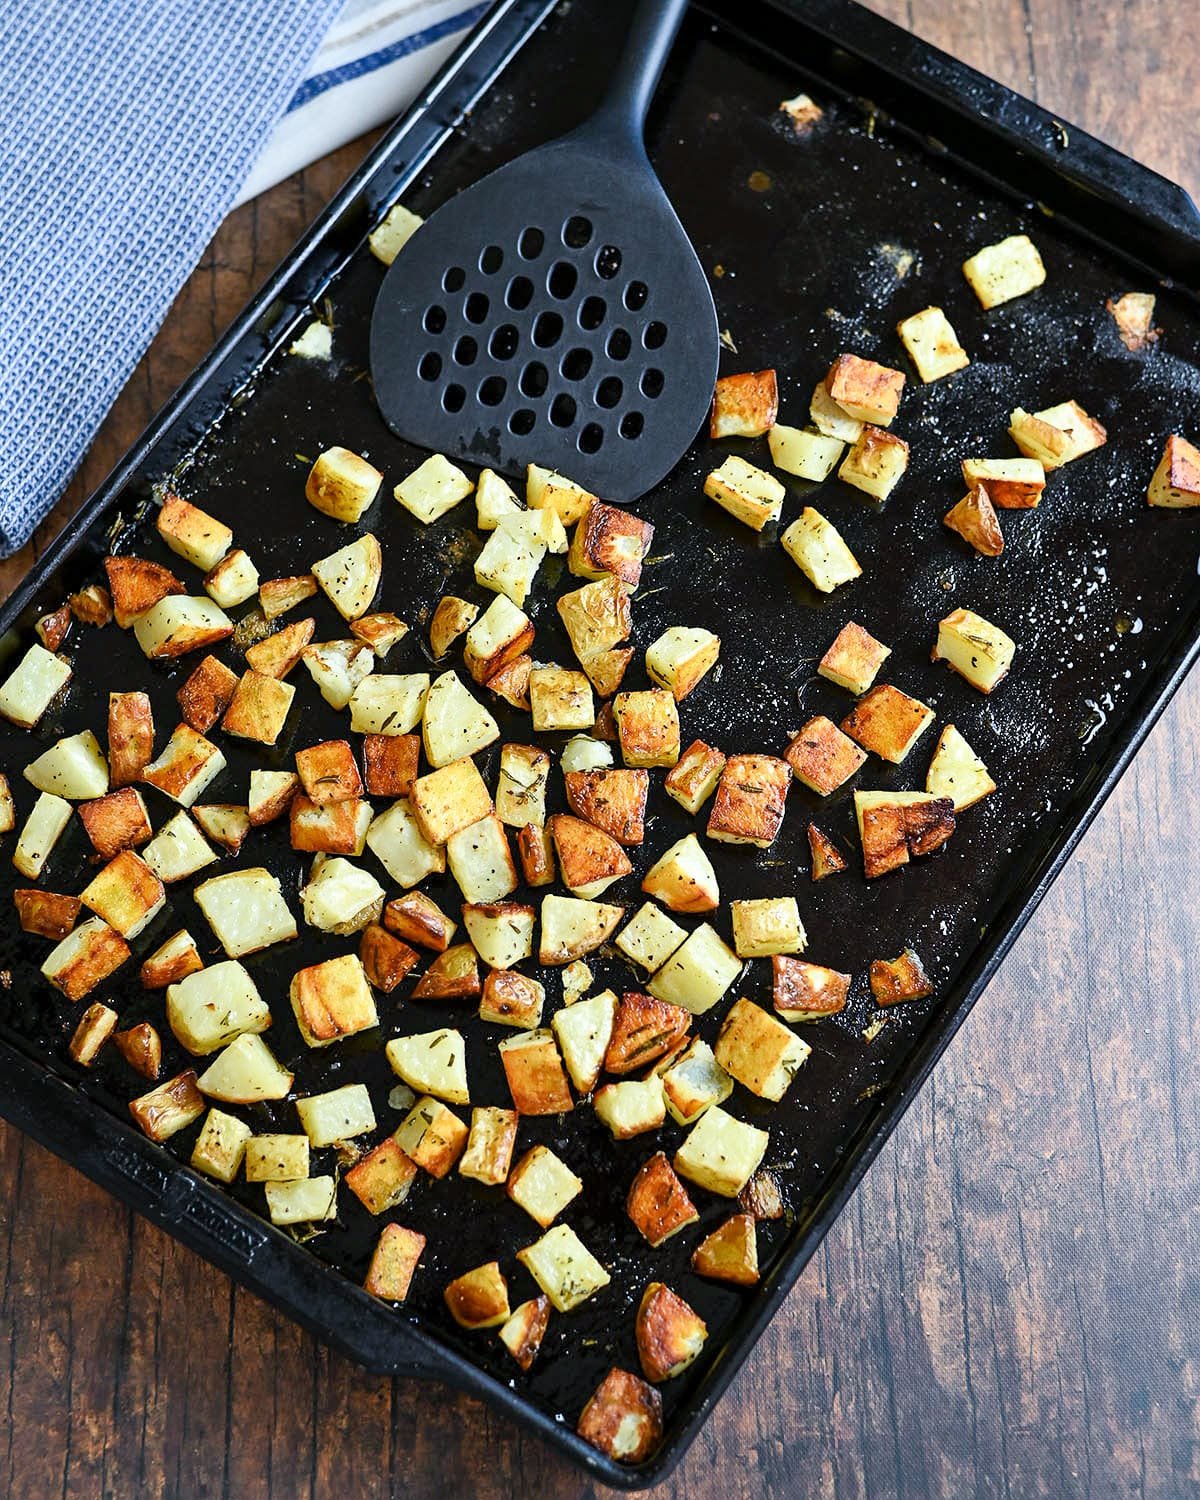 A baking sheet with golden brown roasted diced potatoes.